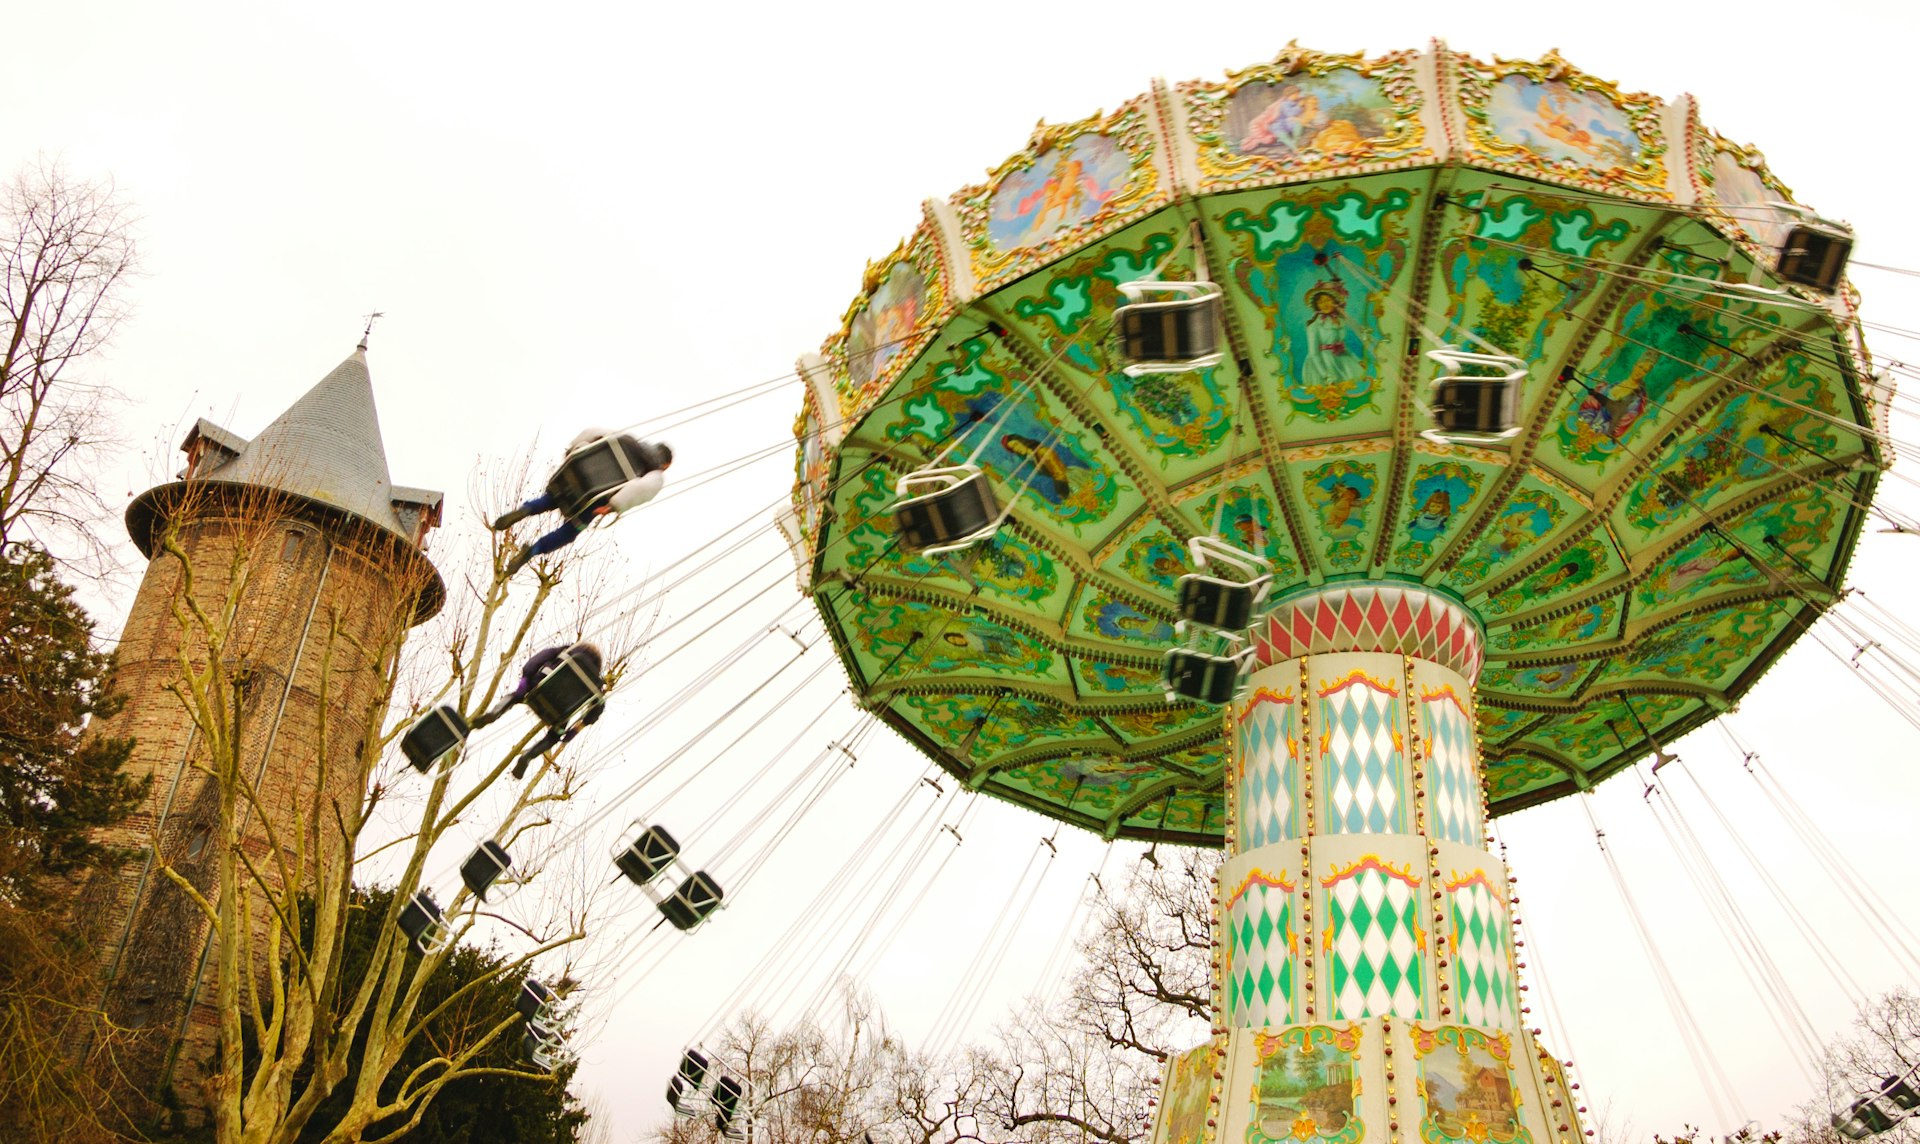 A chain carousel in motion with swings flying out as the carousel spins